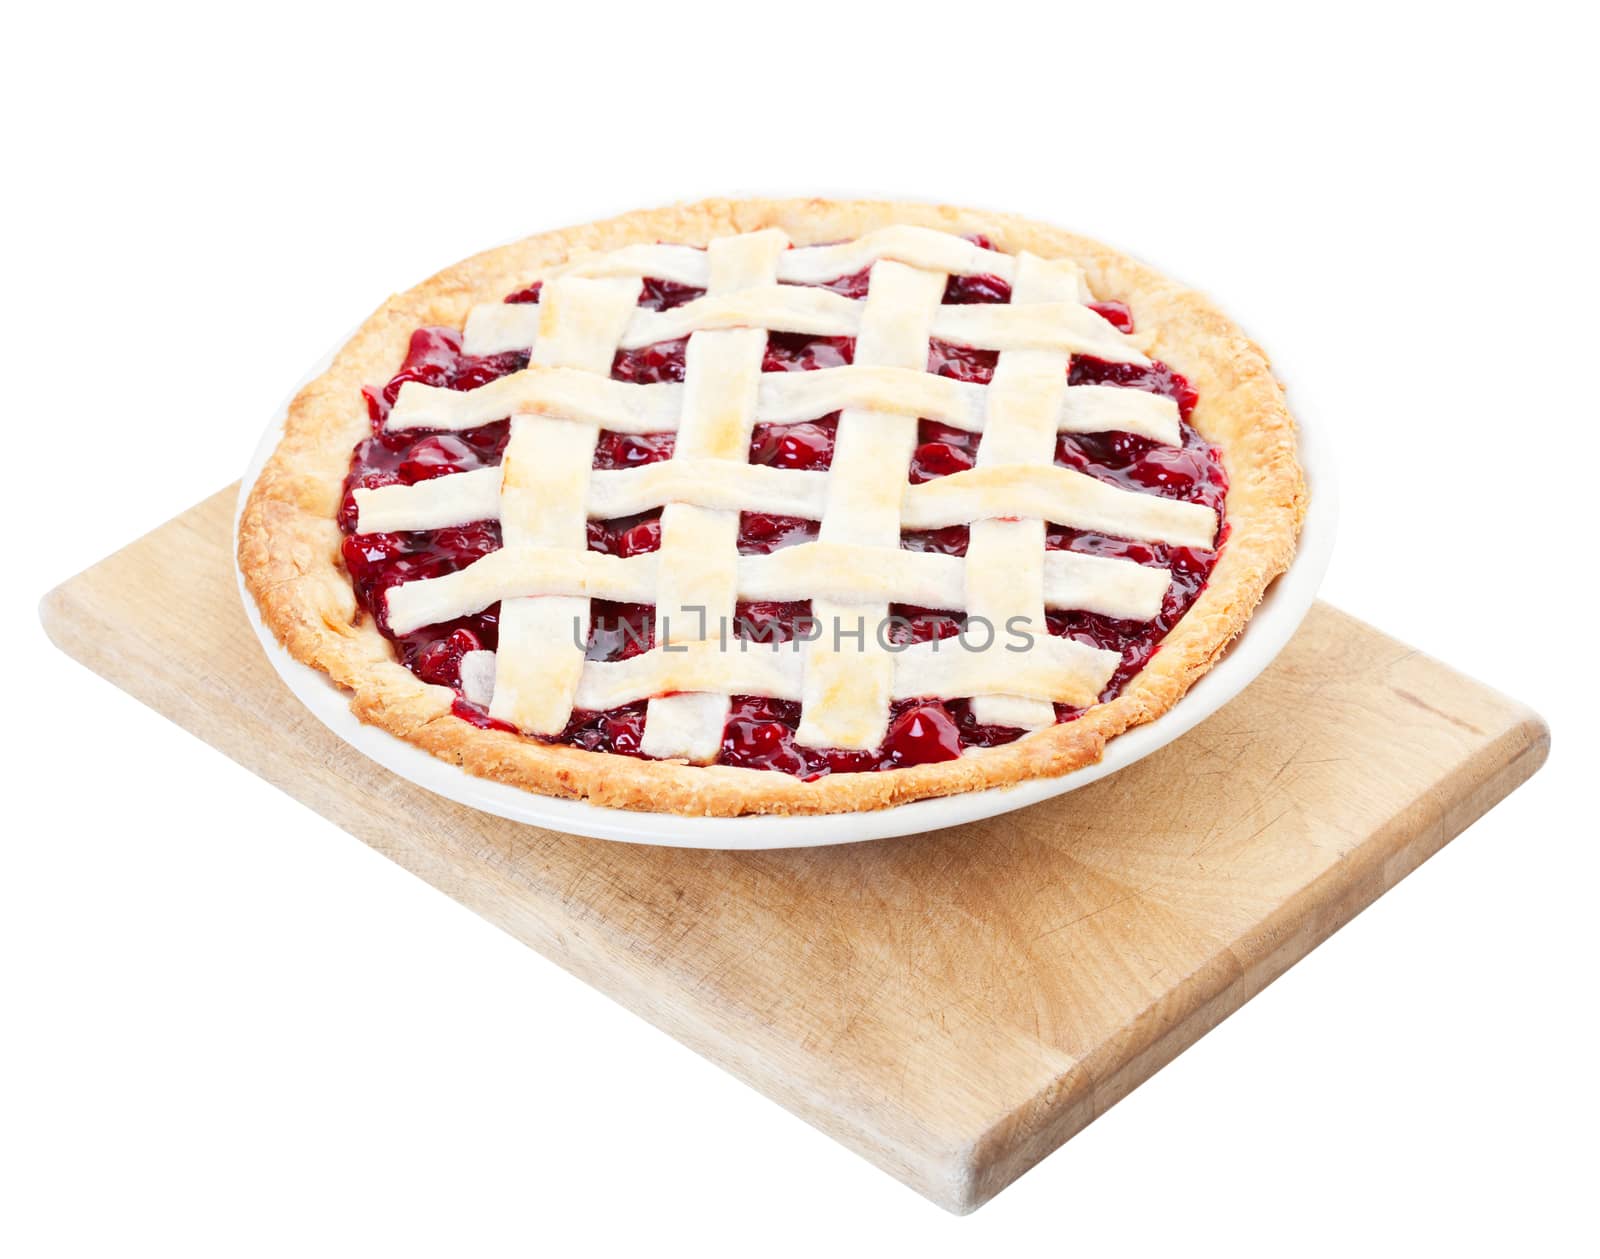 Delicious homemade cherry pie cooling on a wooden cutting board. Shot on white background.